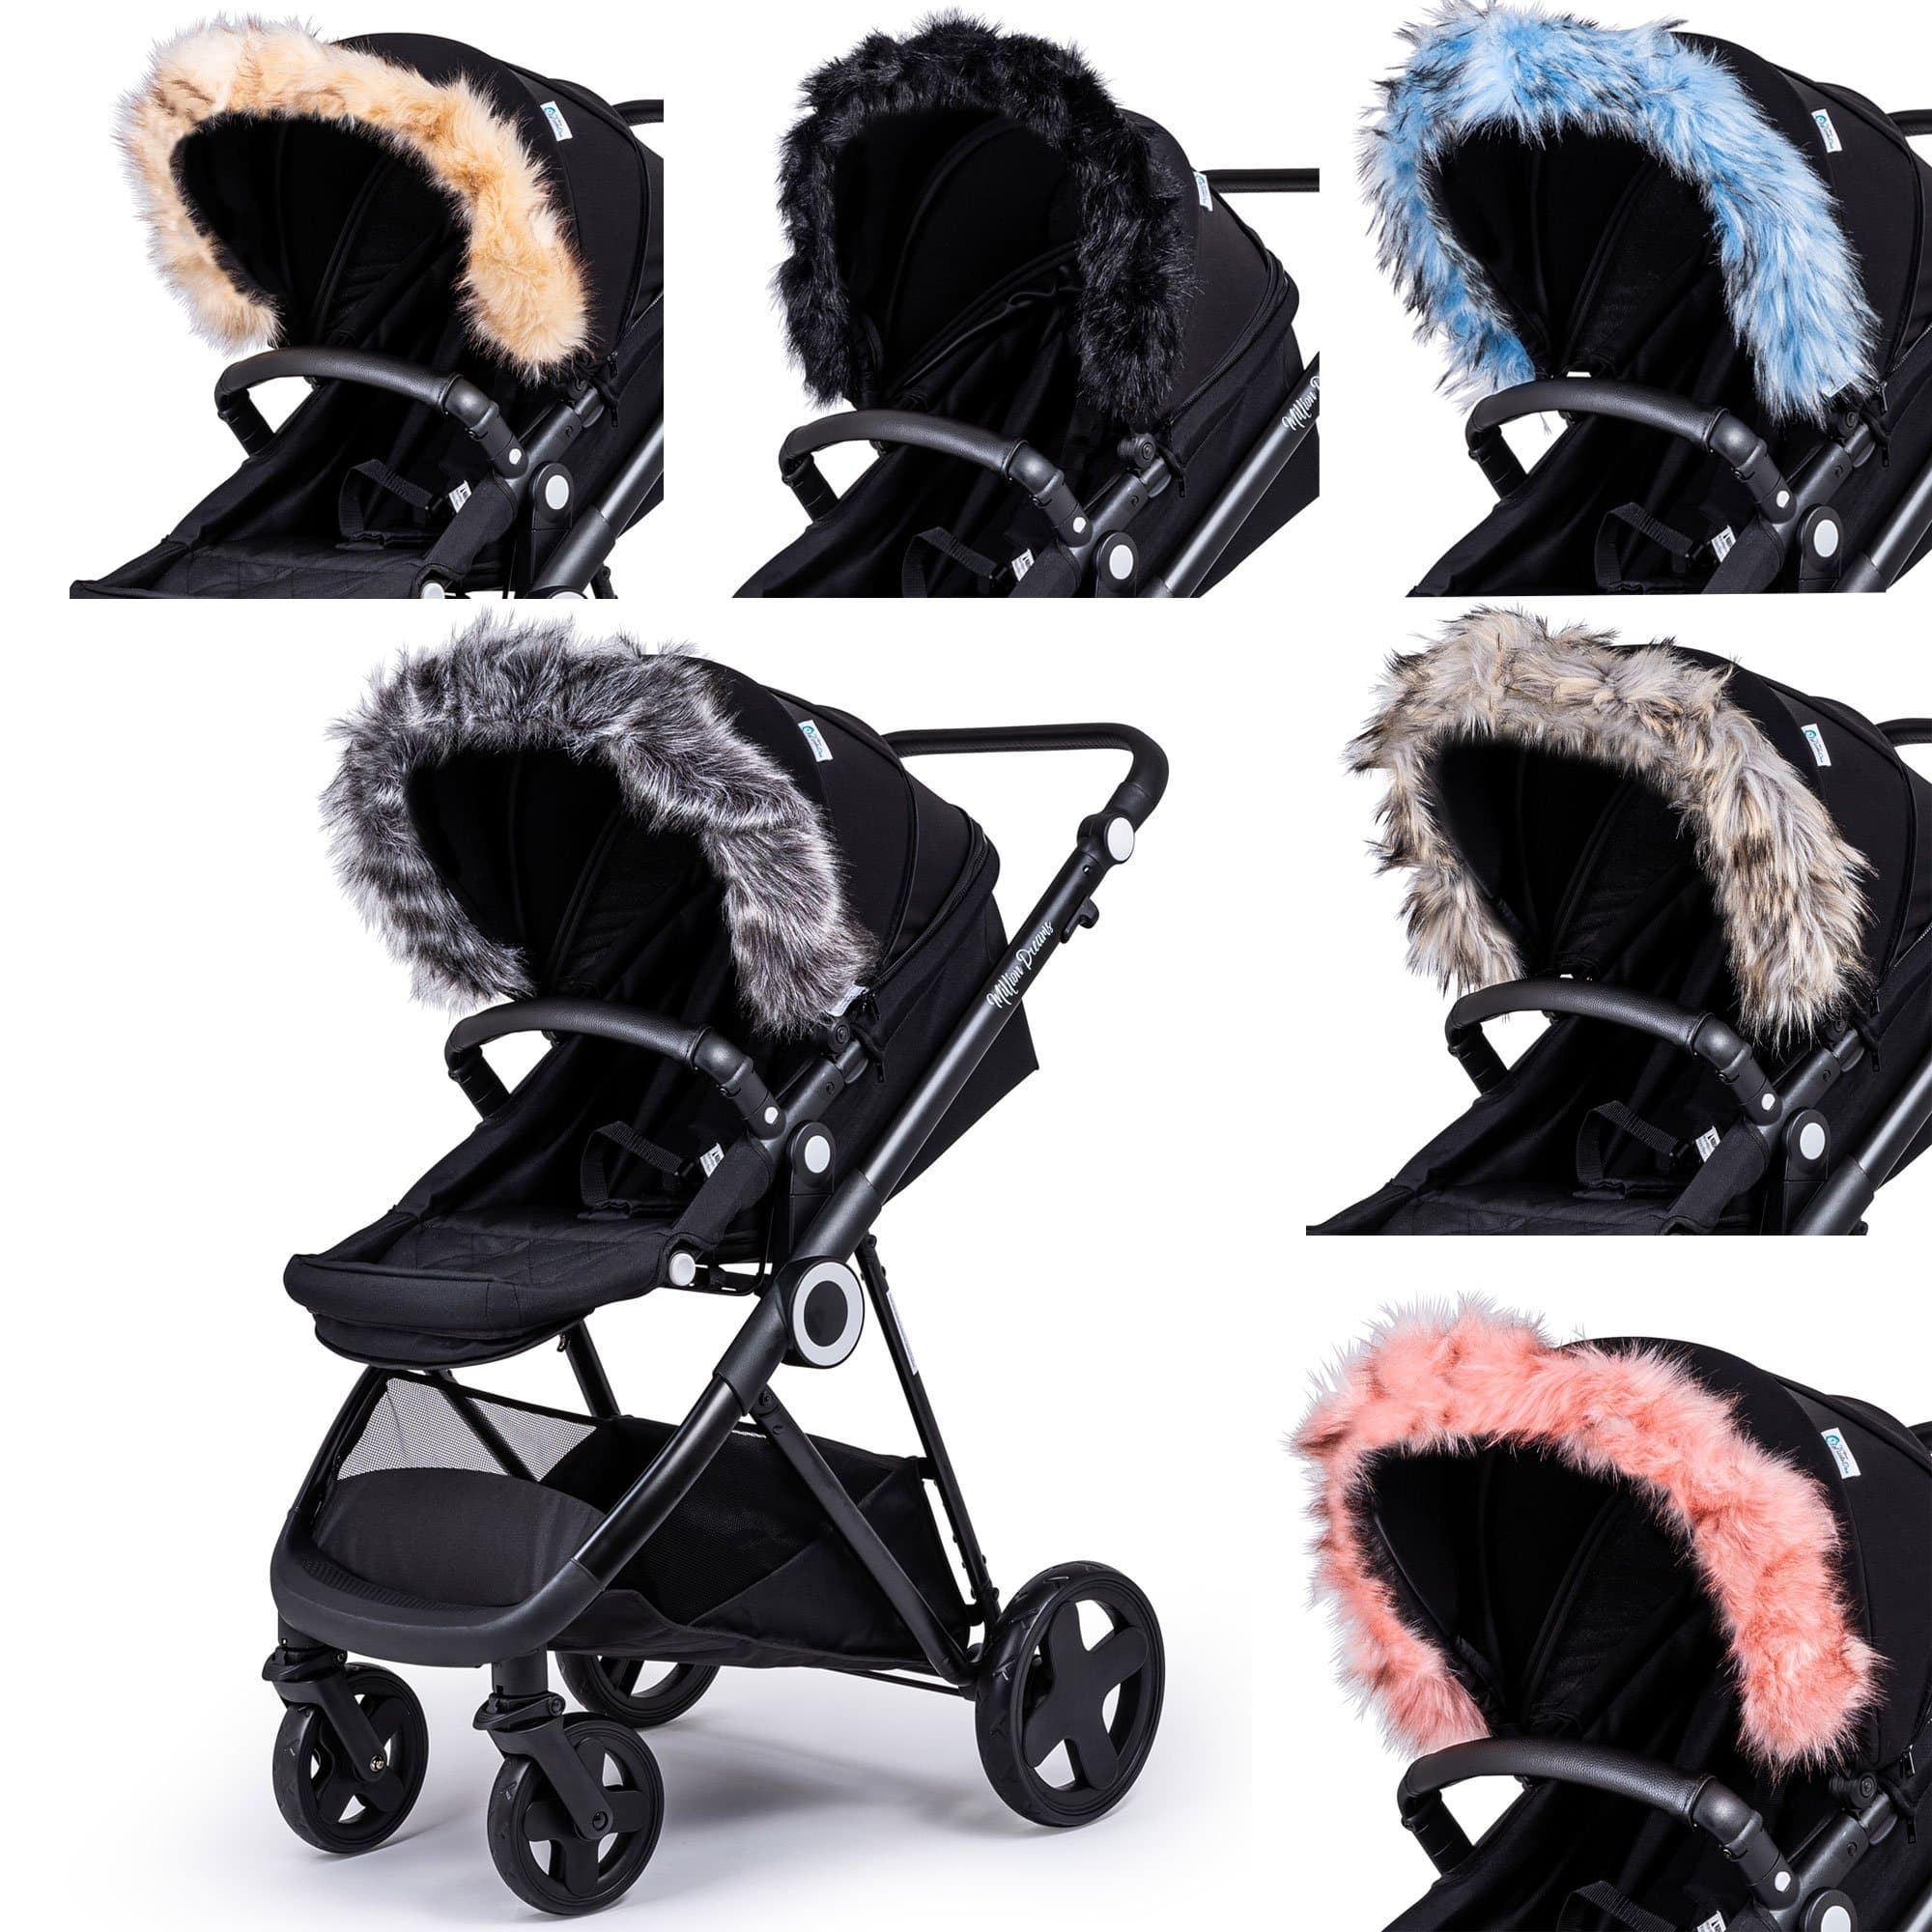 Pram Fur Hood Trim Attachment for Pushchair Compatible with DoBuggy - For Your Little One